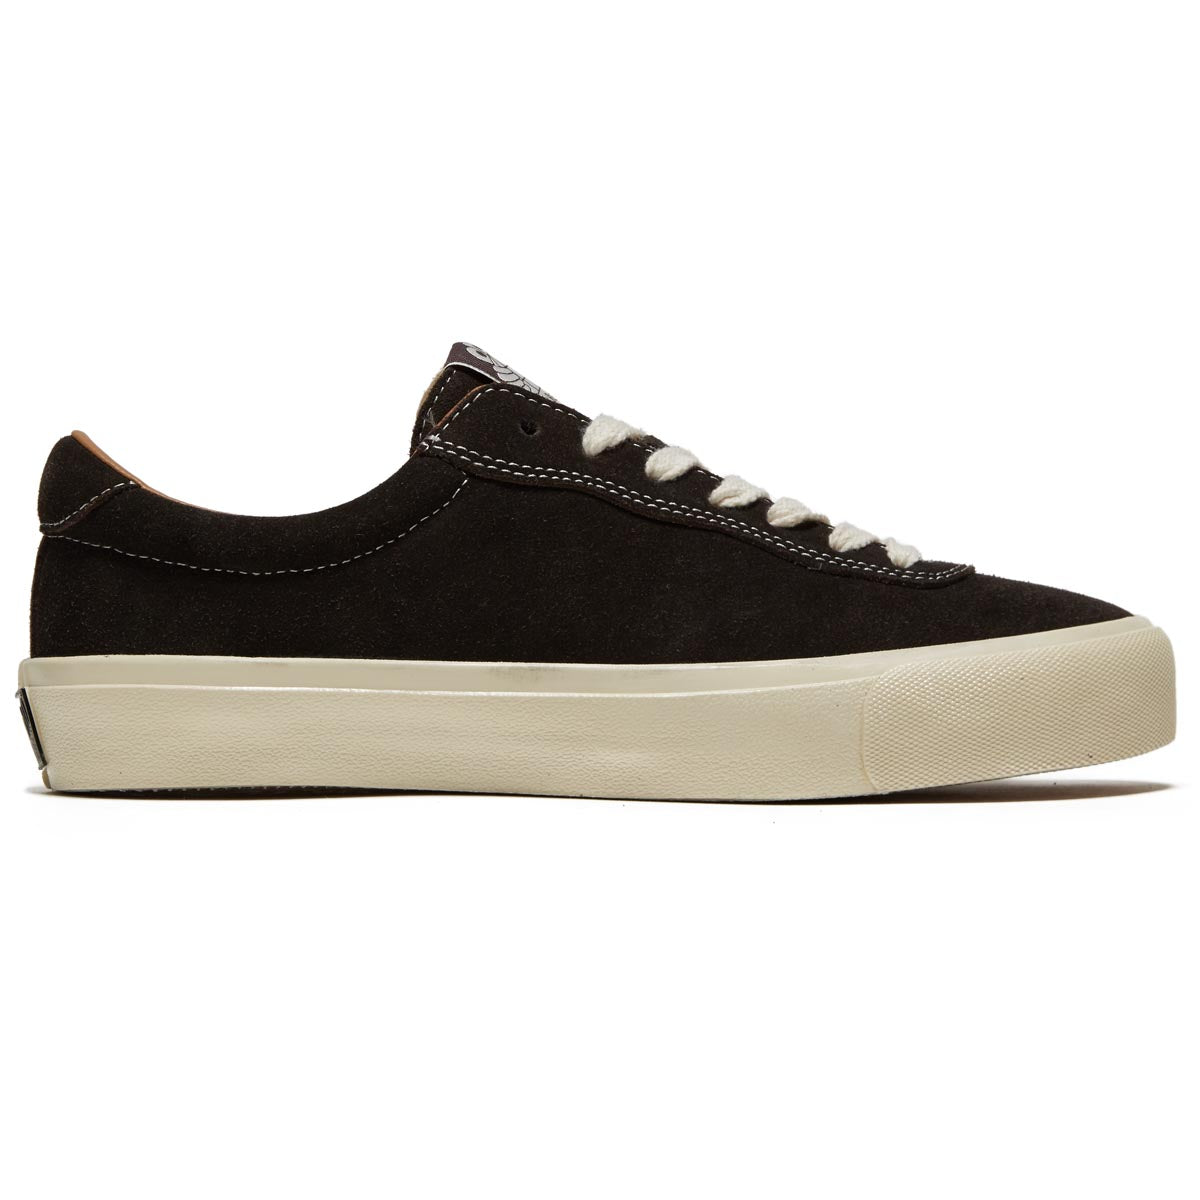 Last Resort AB VM001 Suede Lo Shoes - Coffee Bean/White image 1